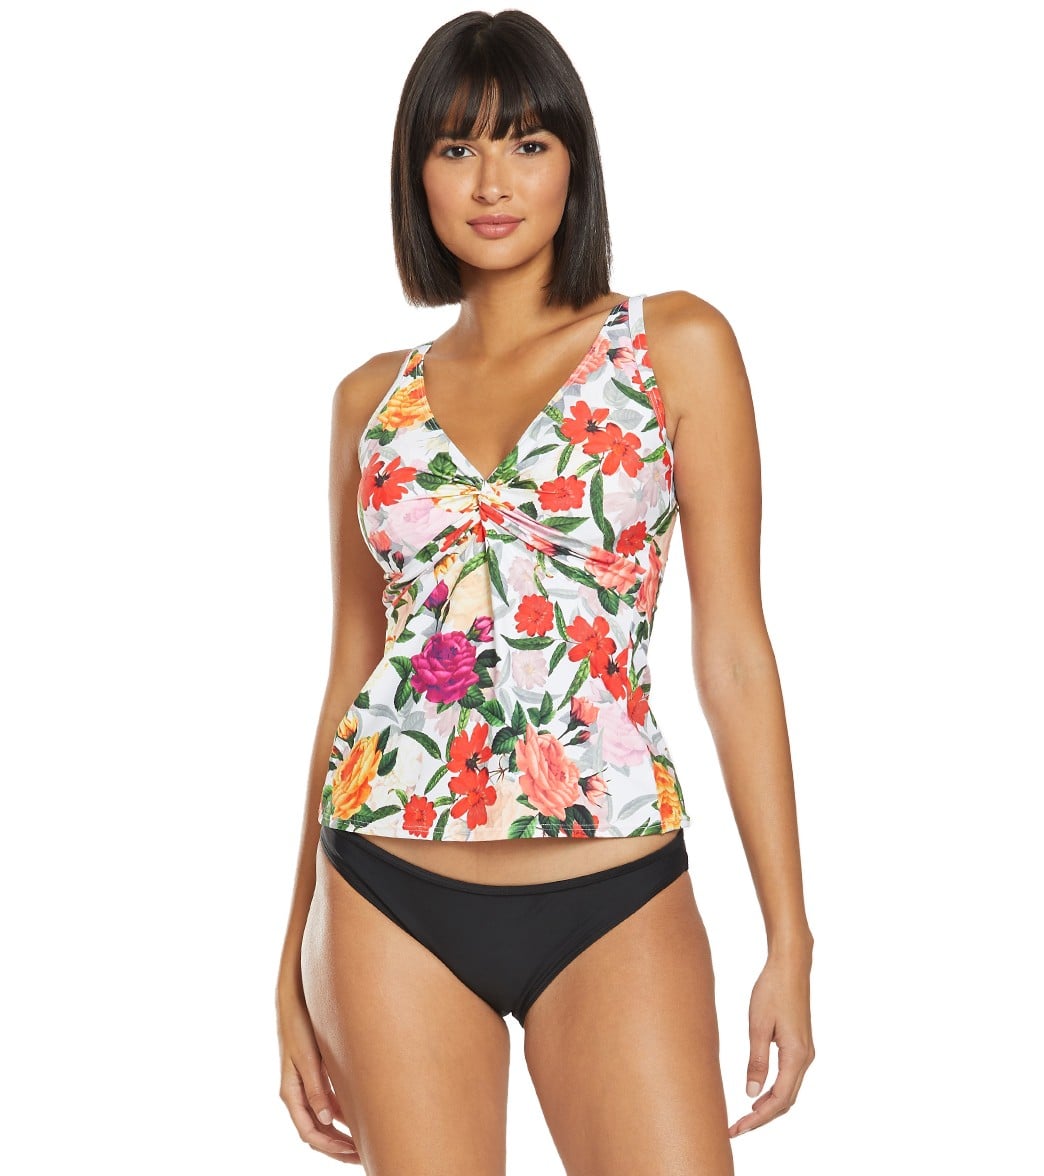 Sunsets Rose Garden Forever Tankini Top D/Dd Cup - 32D - Swimoutlet.com